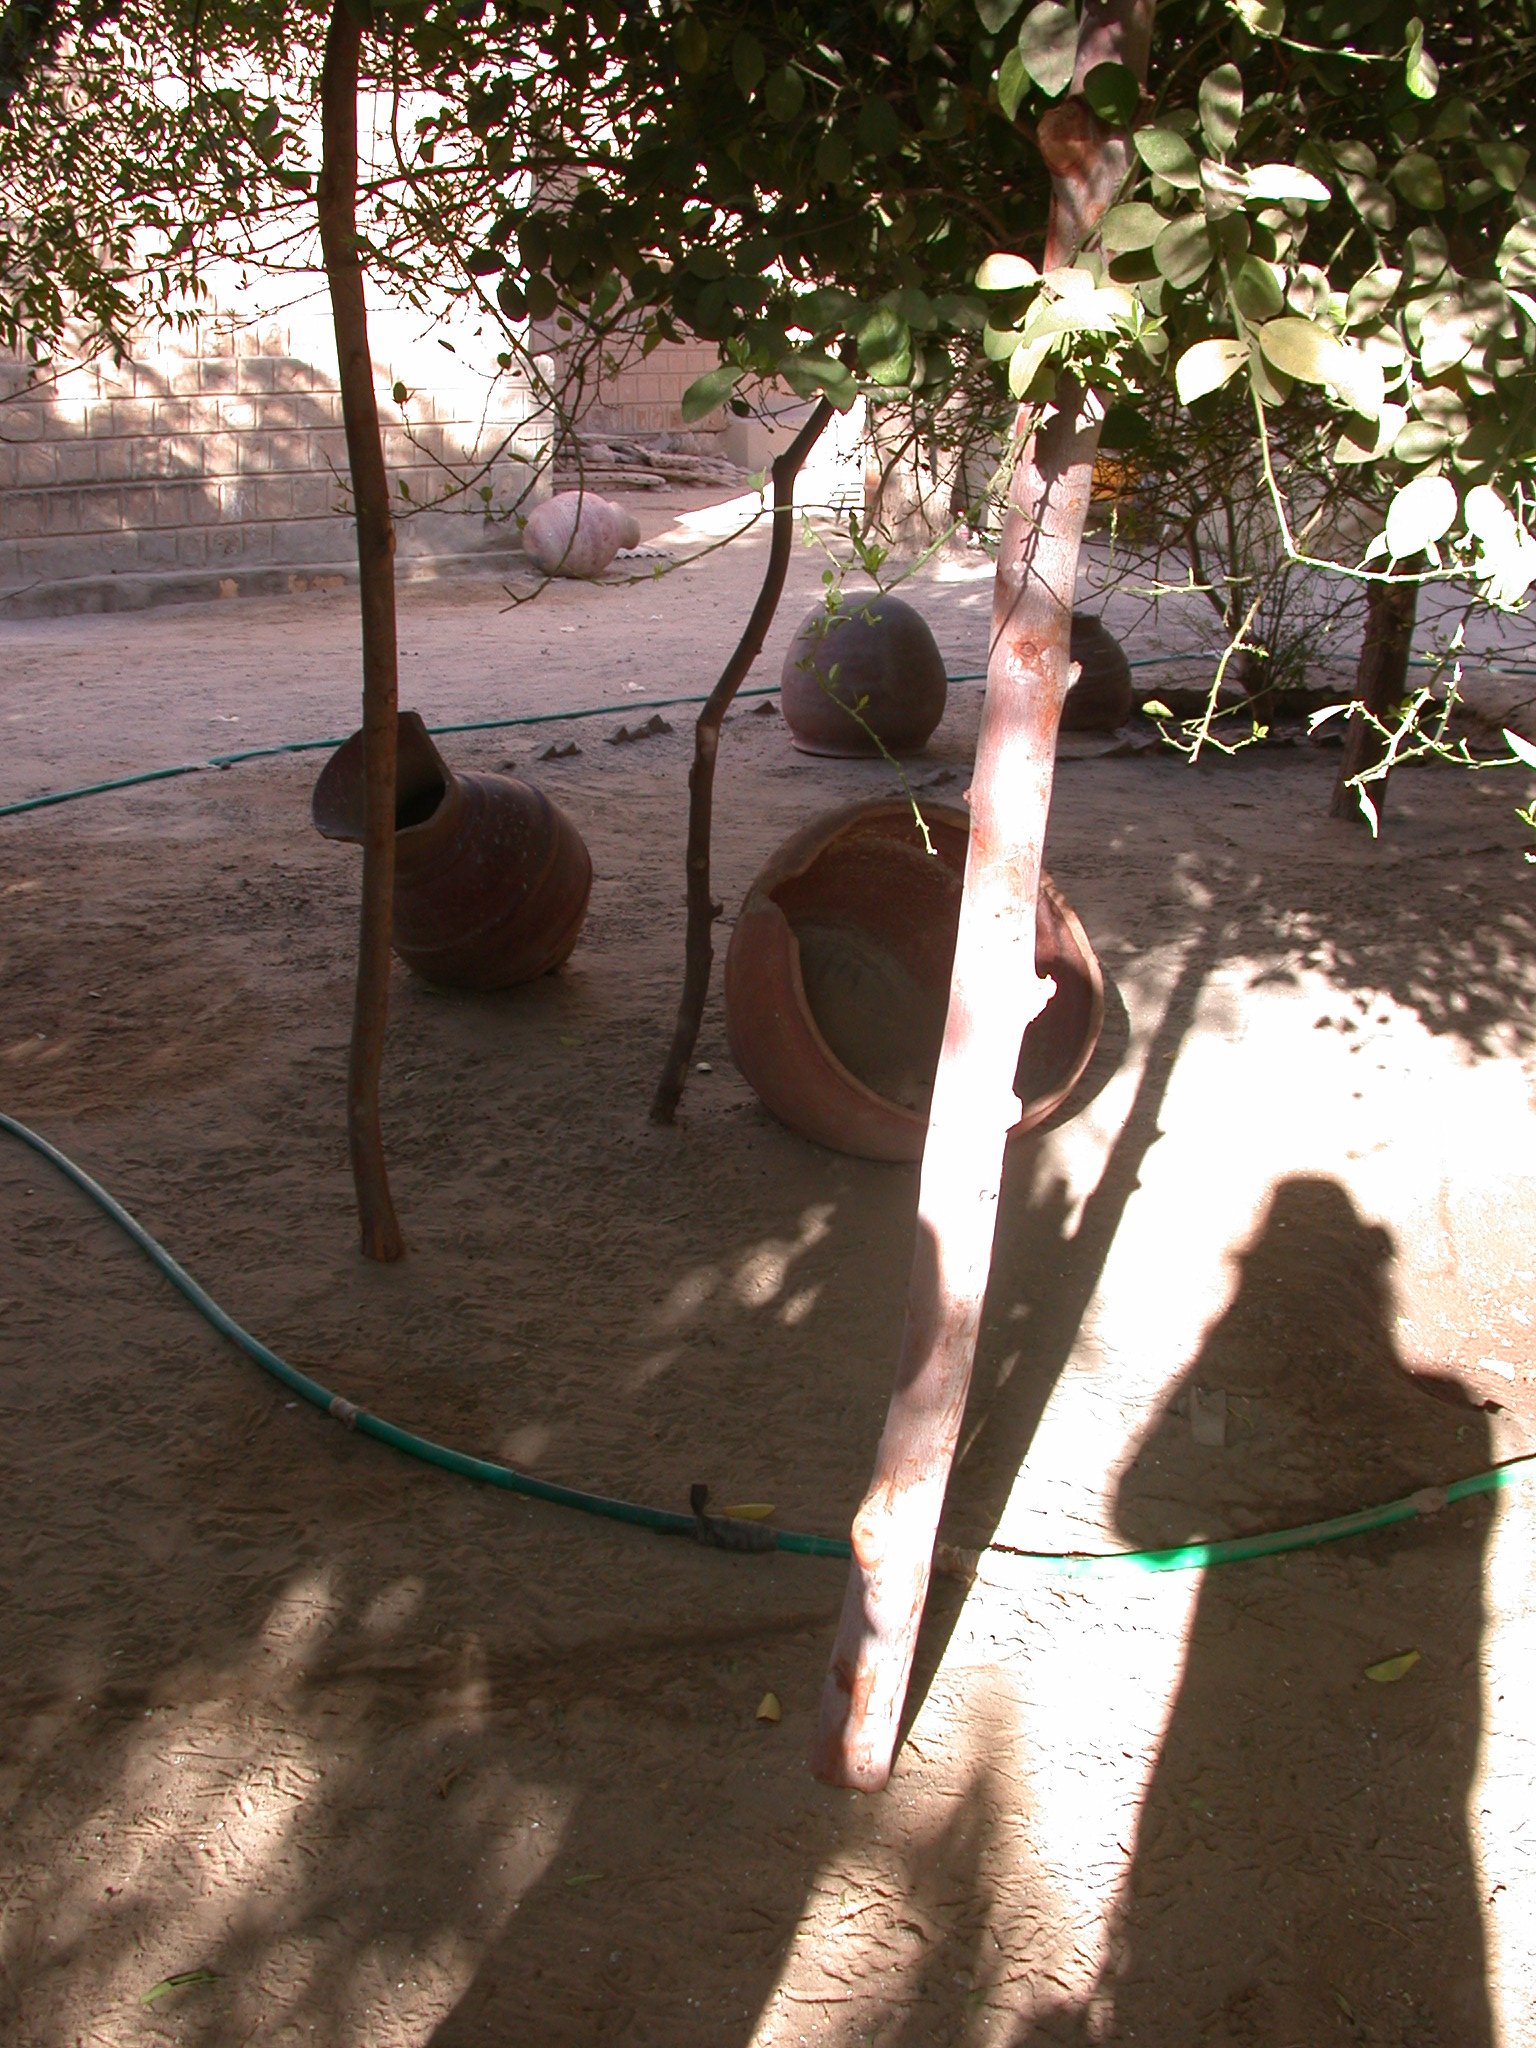 Garden at Reputed Site of Well of Boctou Whence Timbuktu Got Its Name, Timbuktu, Mali